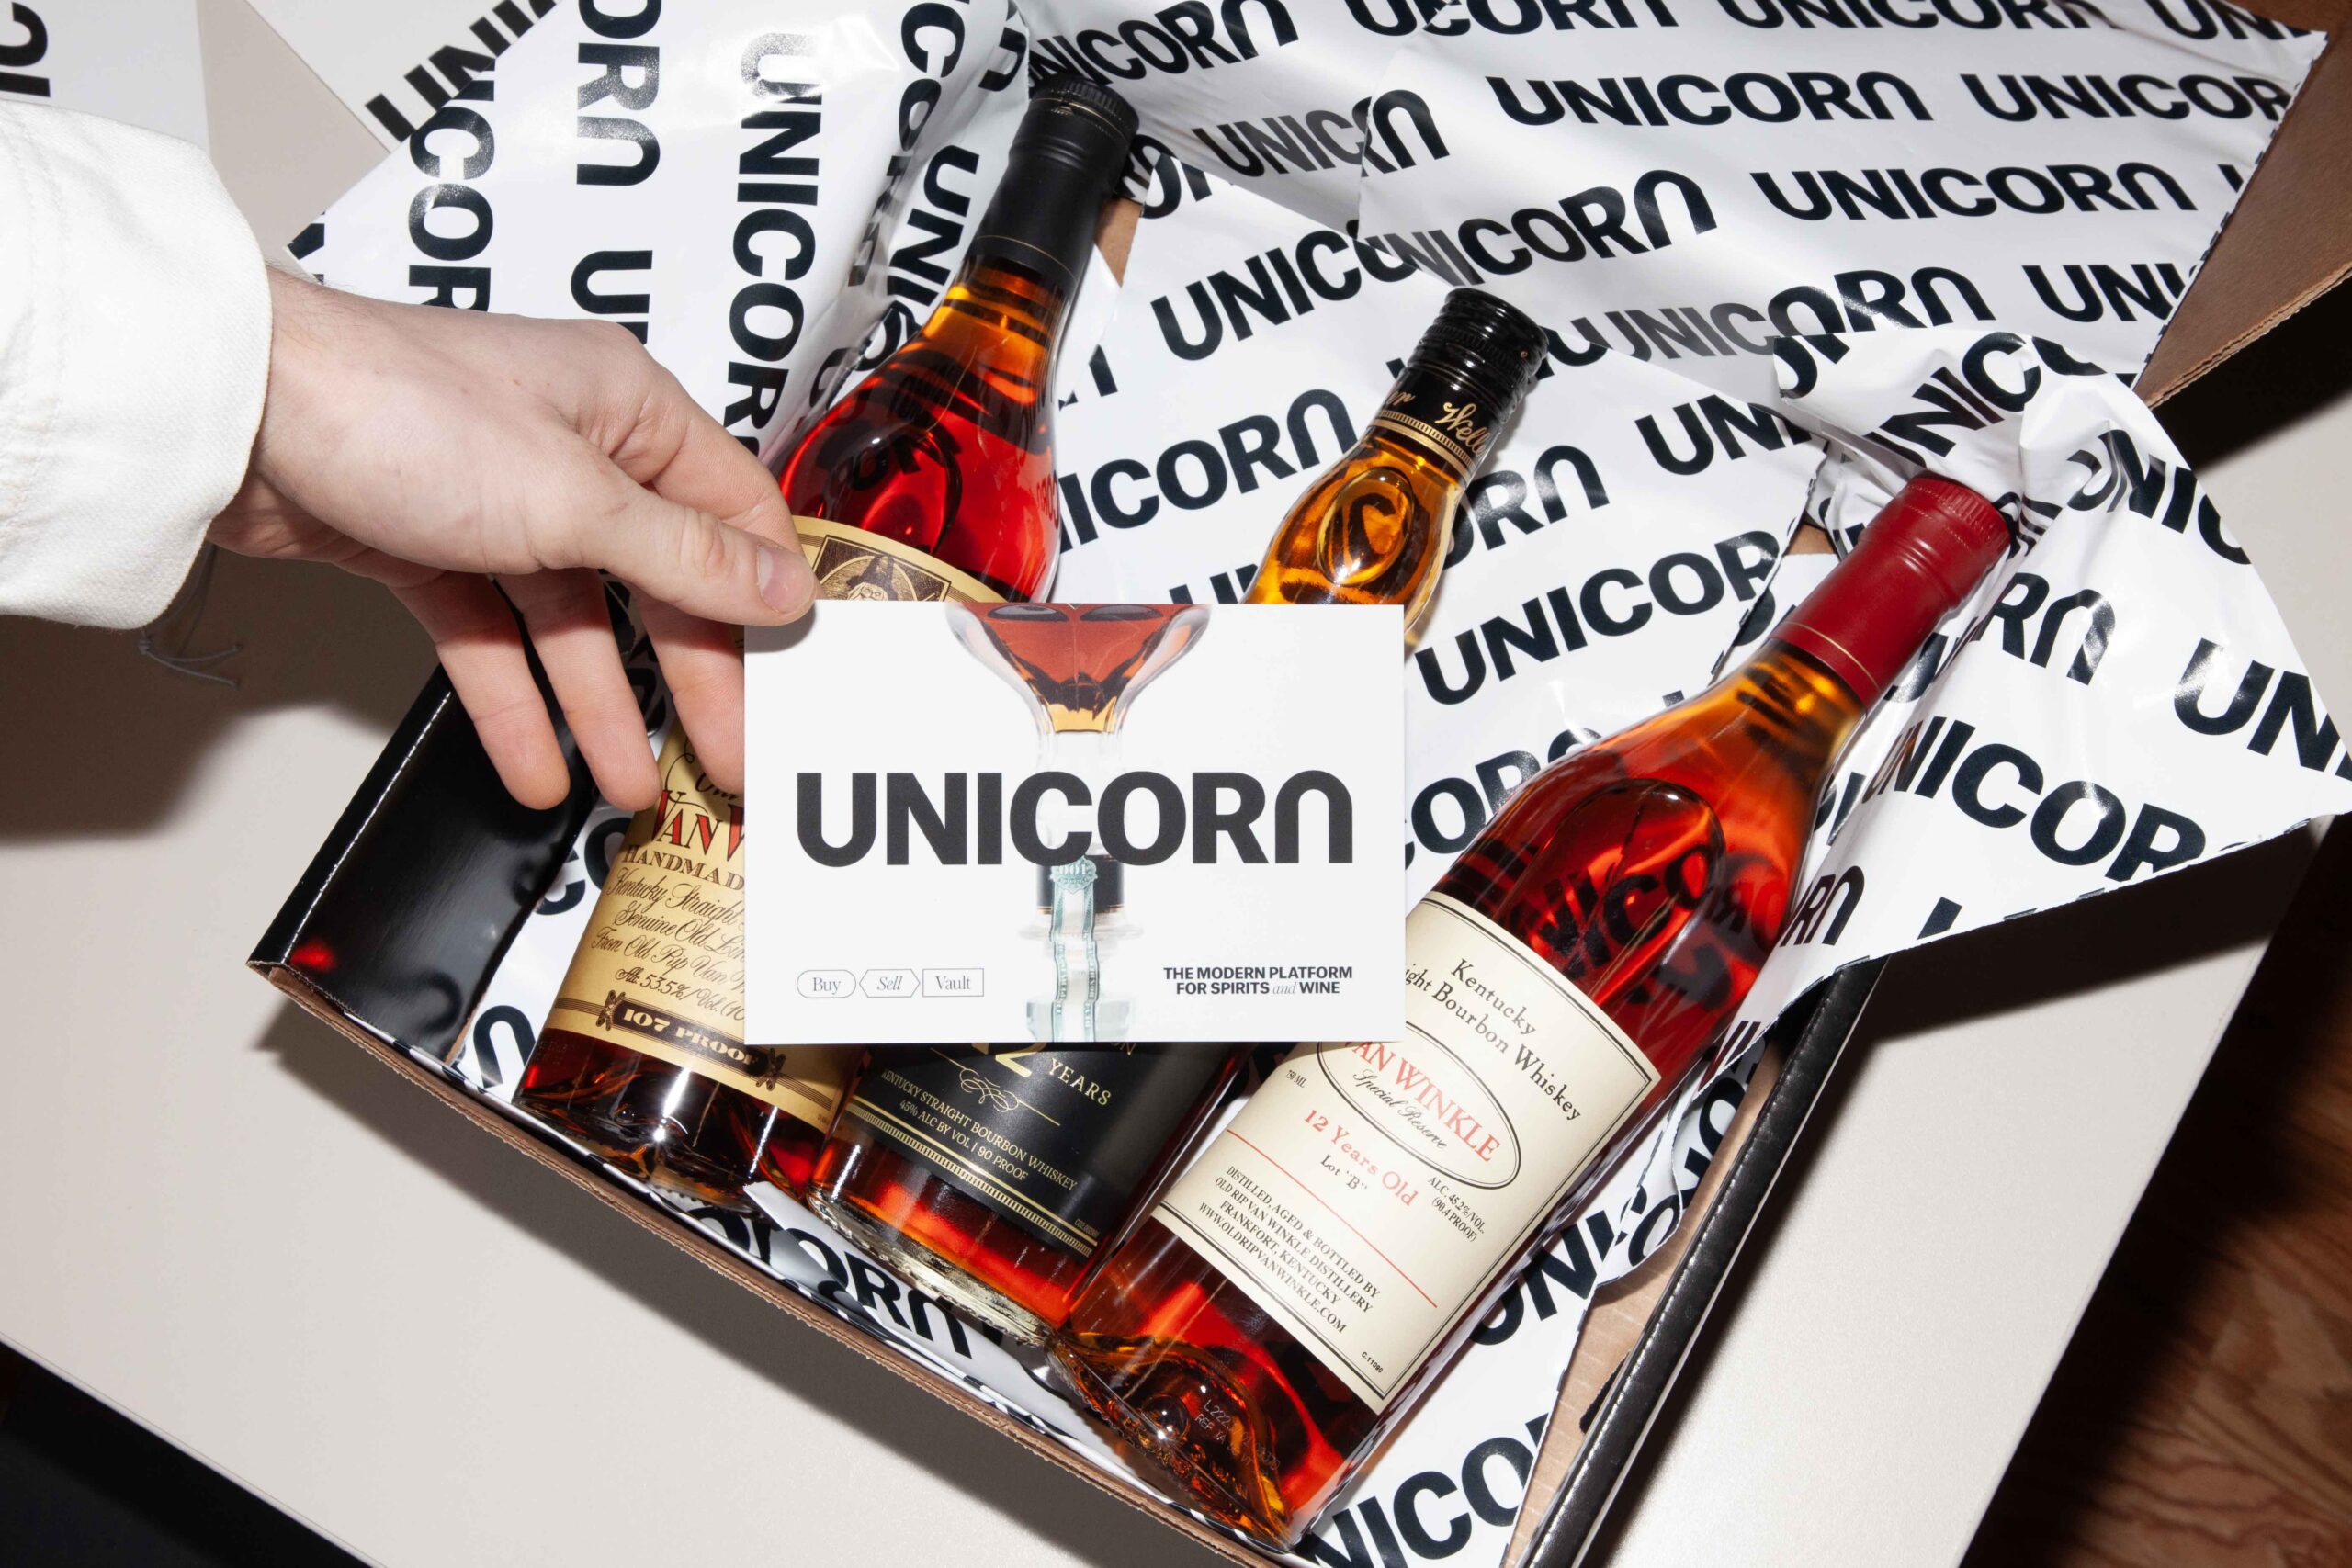 Unicorn Launches New,  Modern Platform for Spirits and Wine